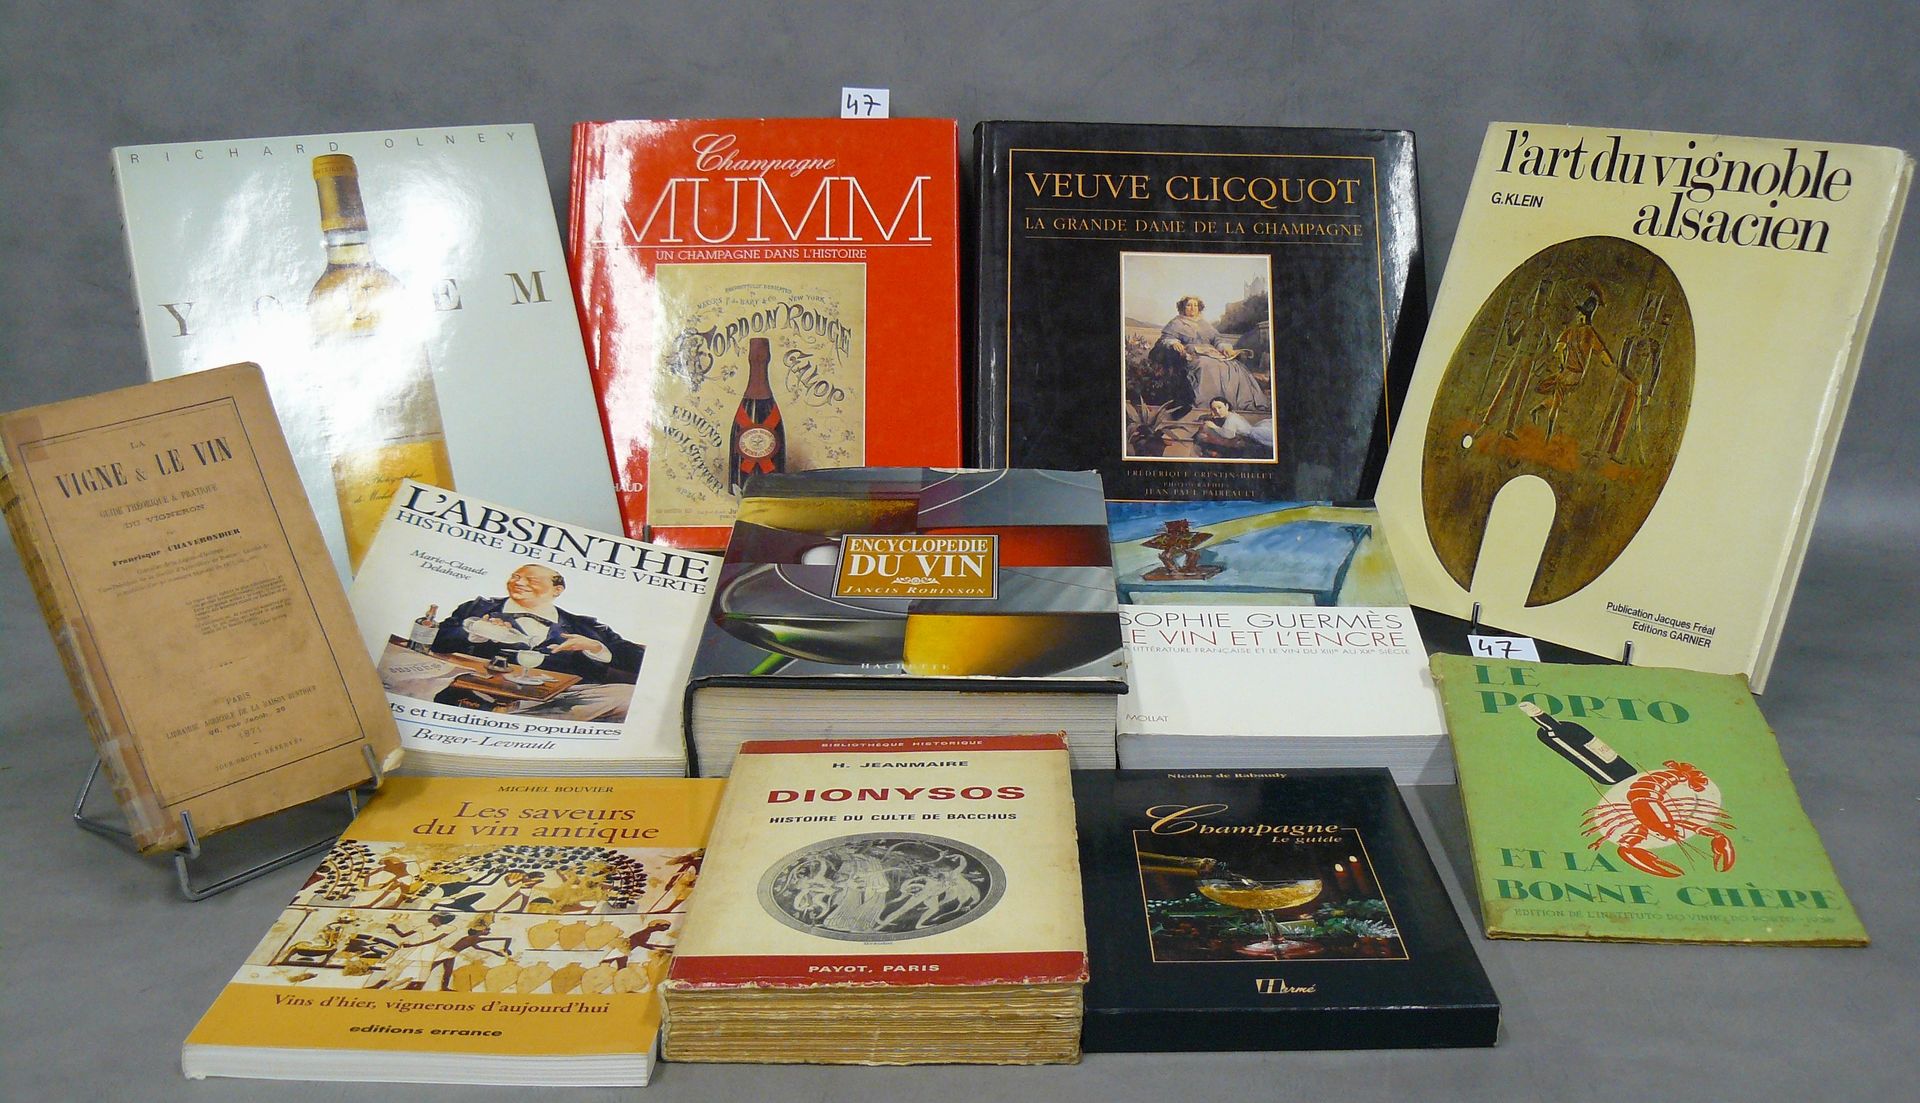 VINS lot of 12 books on wines and champagne including : Yquem